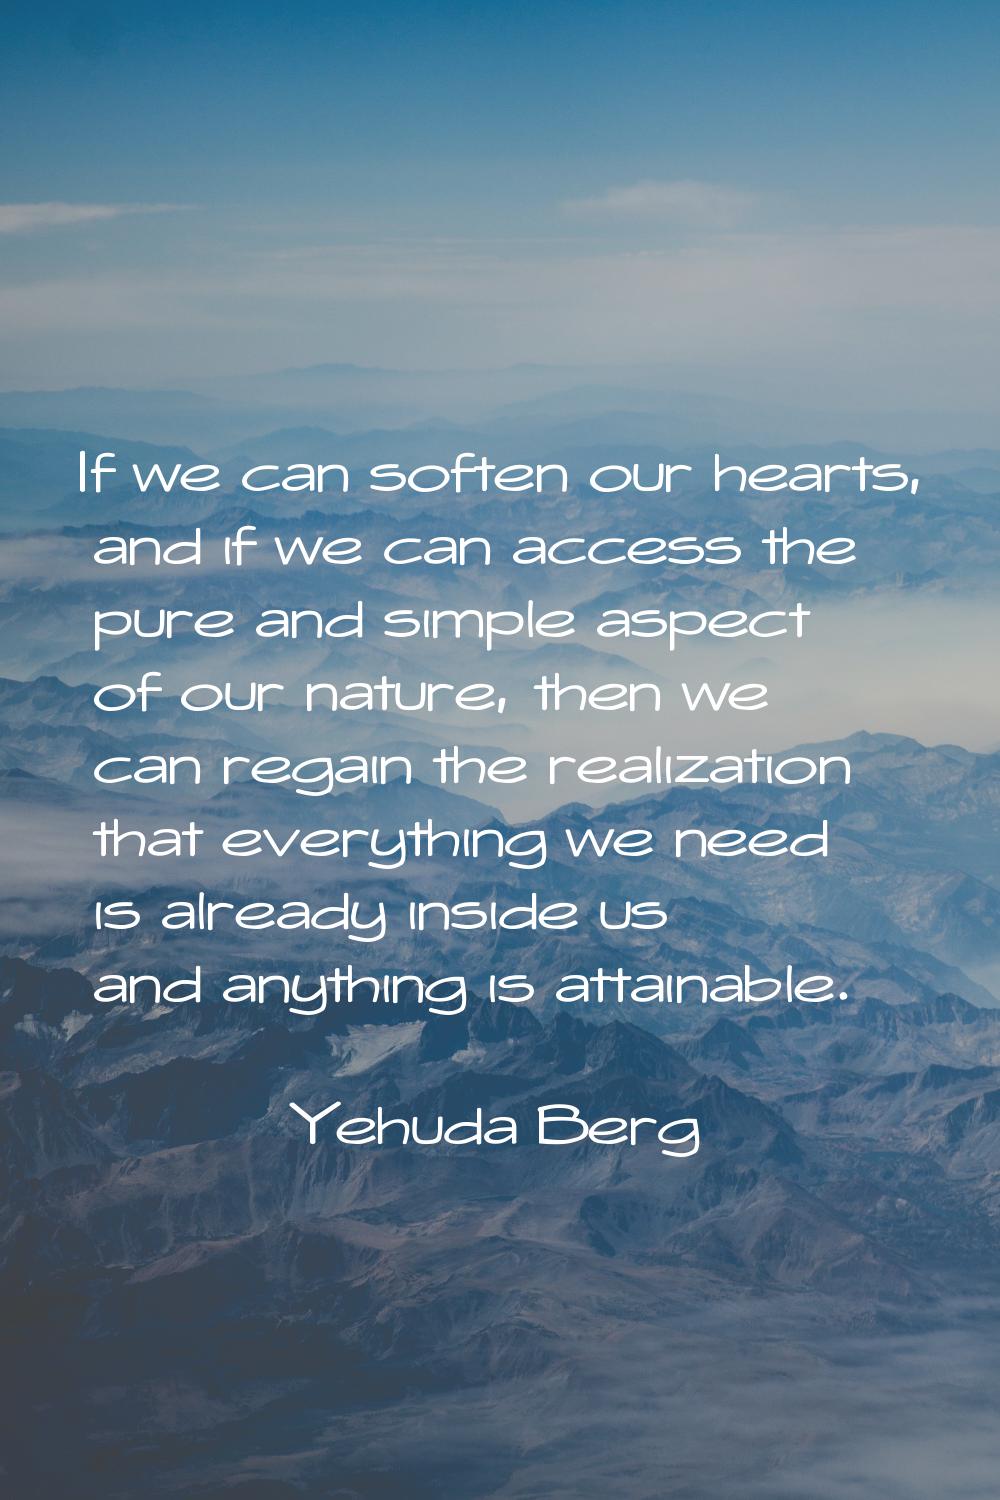 If we can soften our hearts, and if we can access the pure and simple aspect of our nature, then we